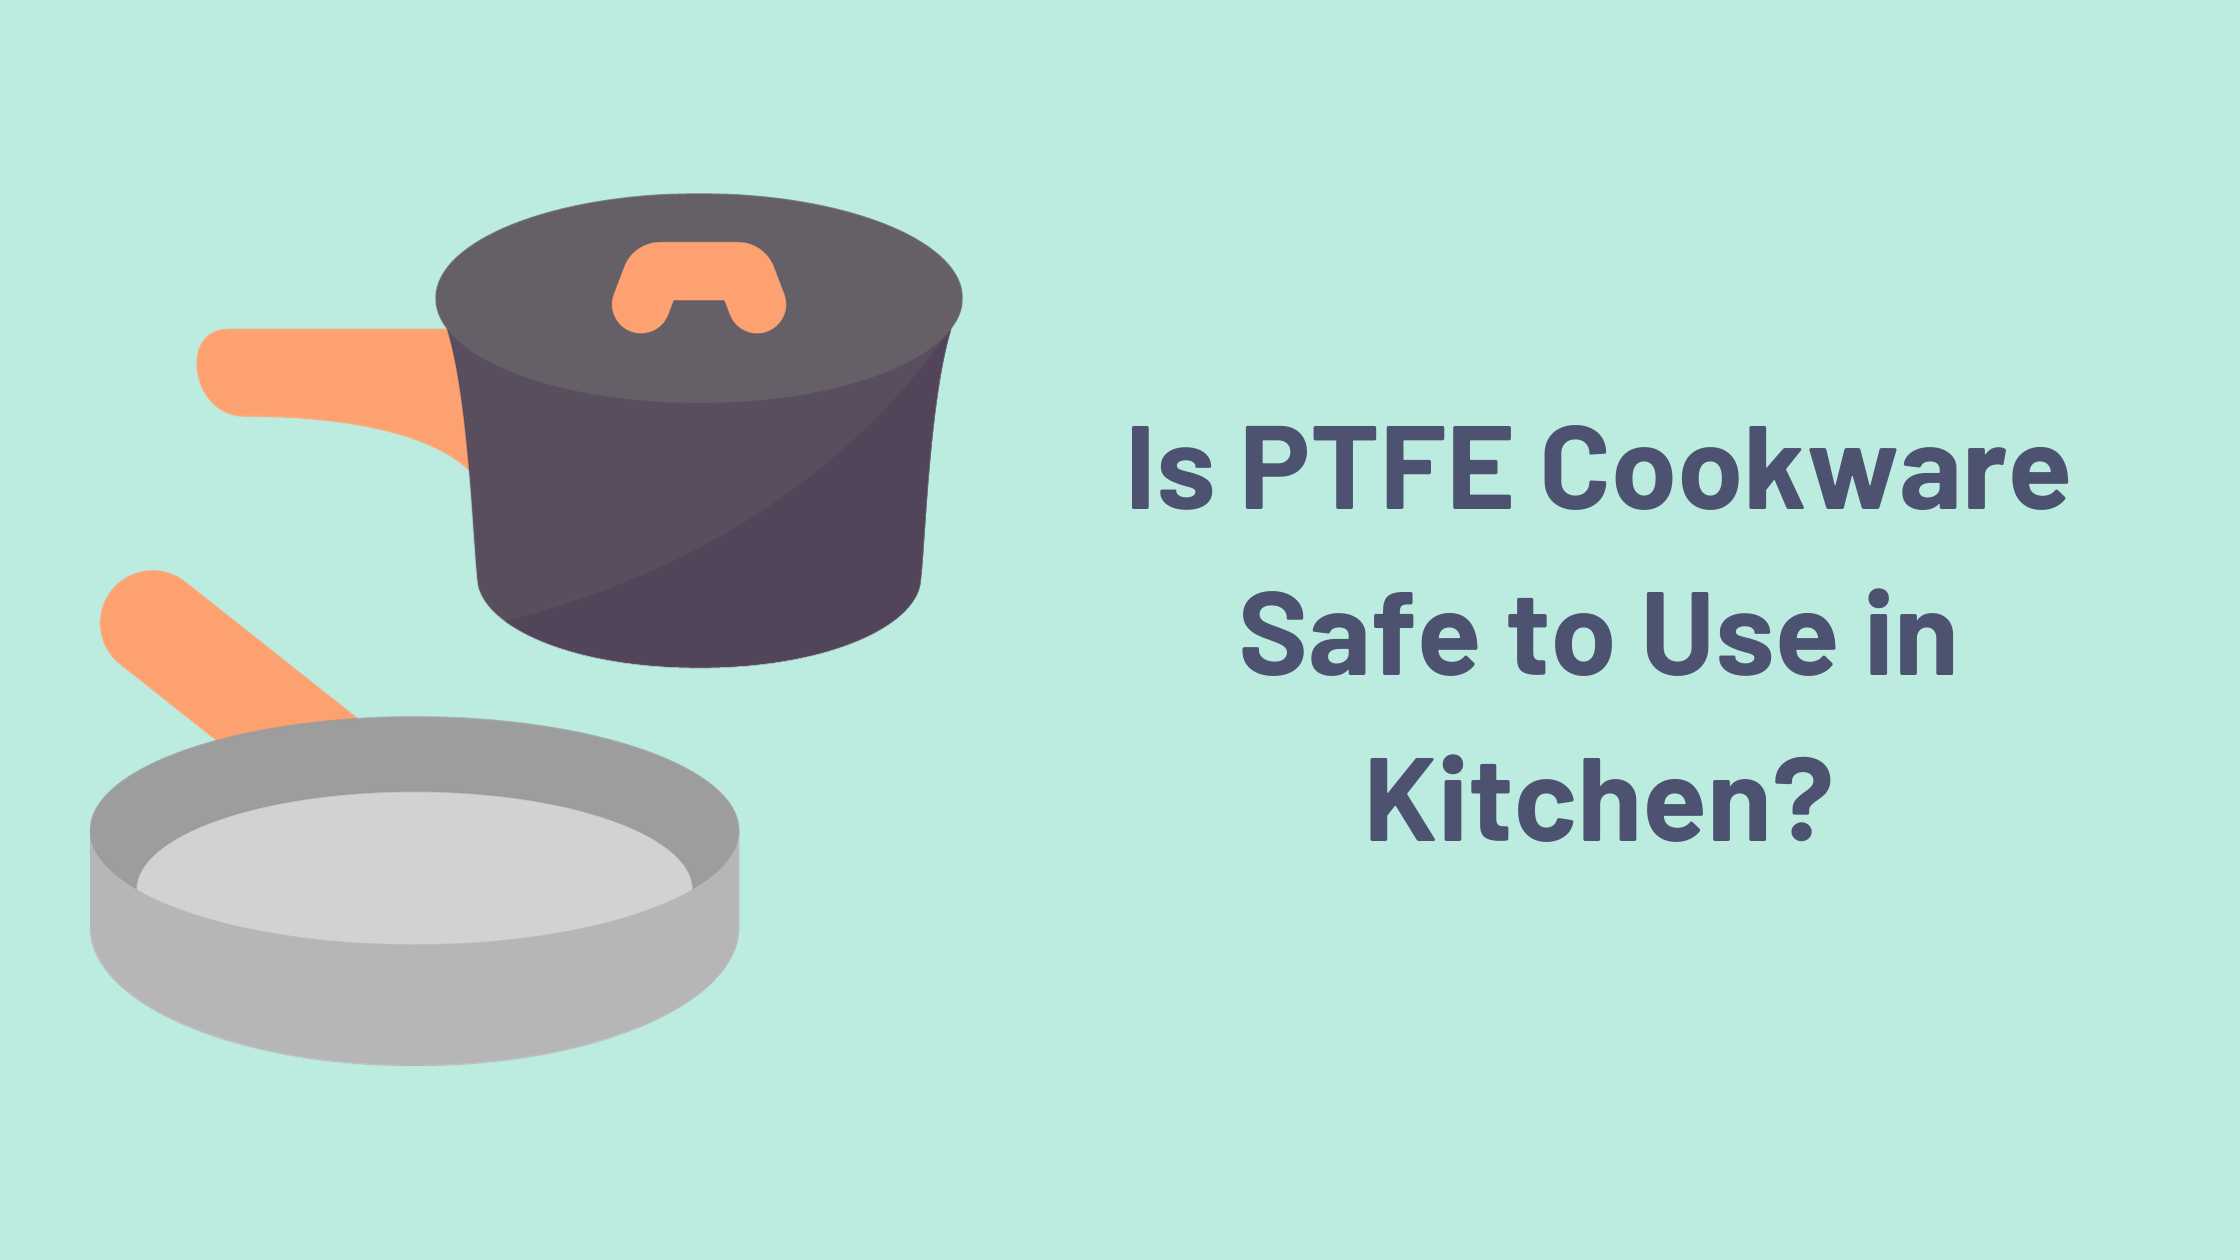 Is PTFE Cookware Safe to Use in Kitchen?